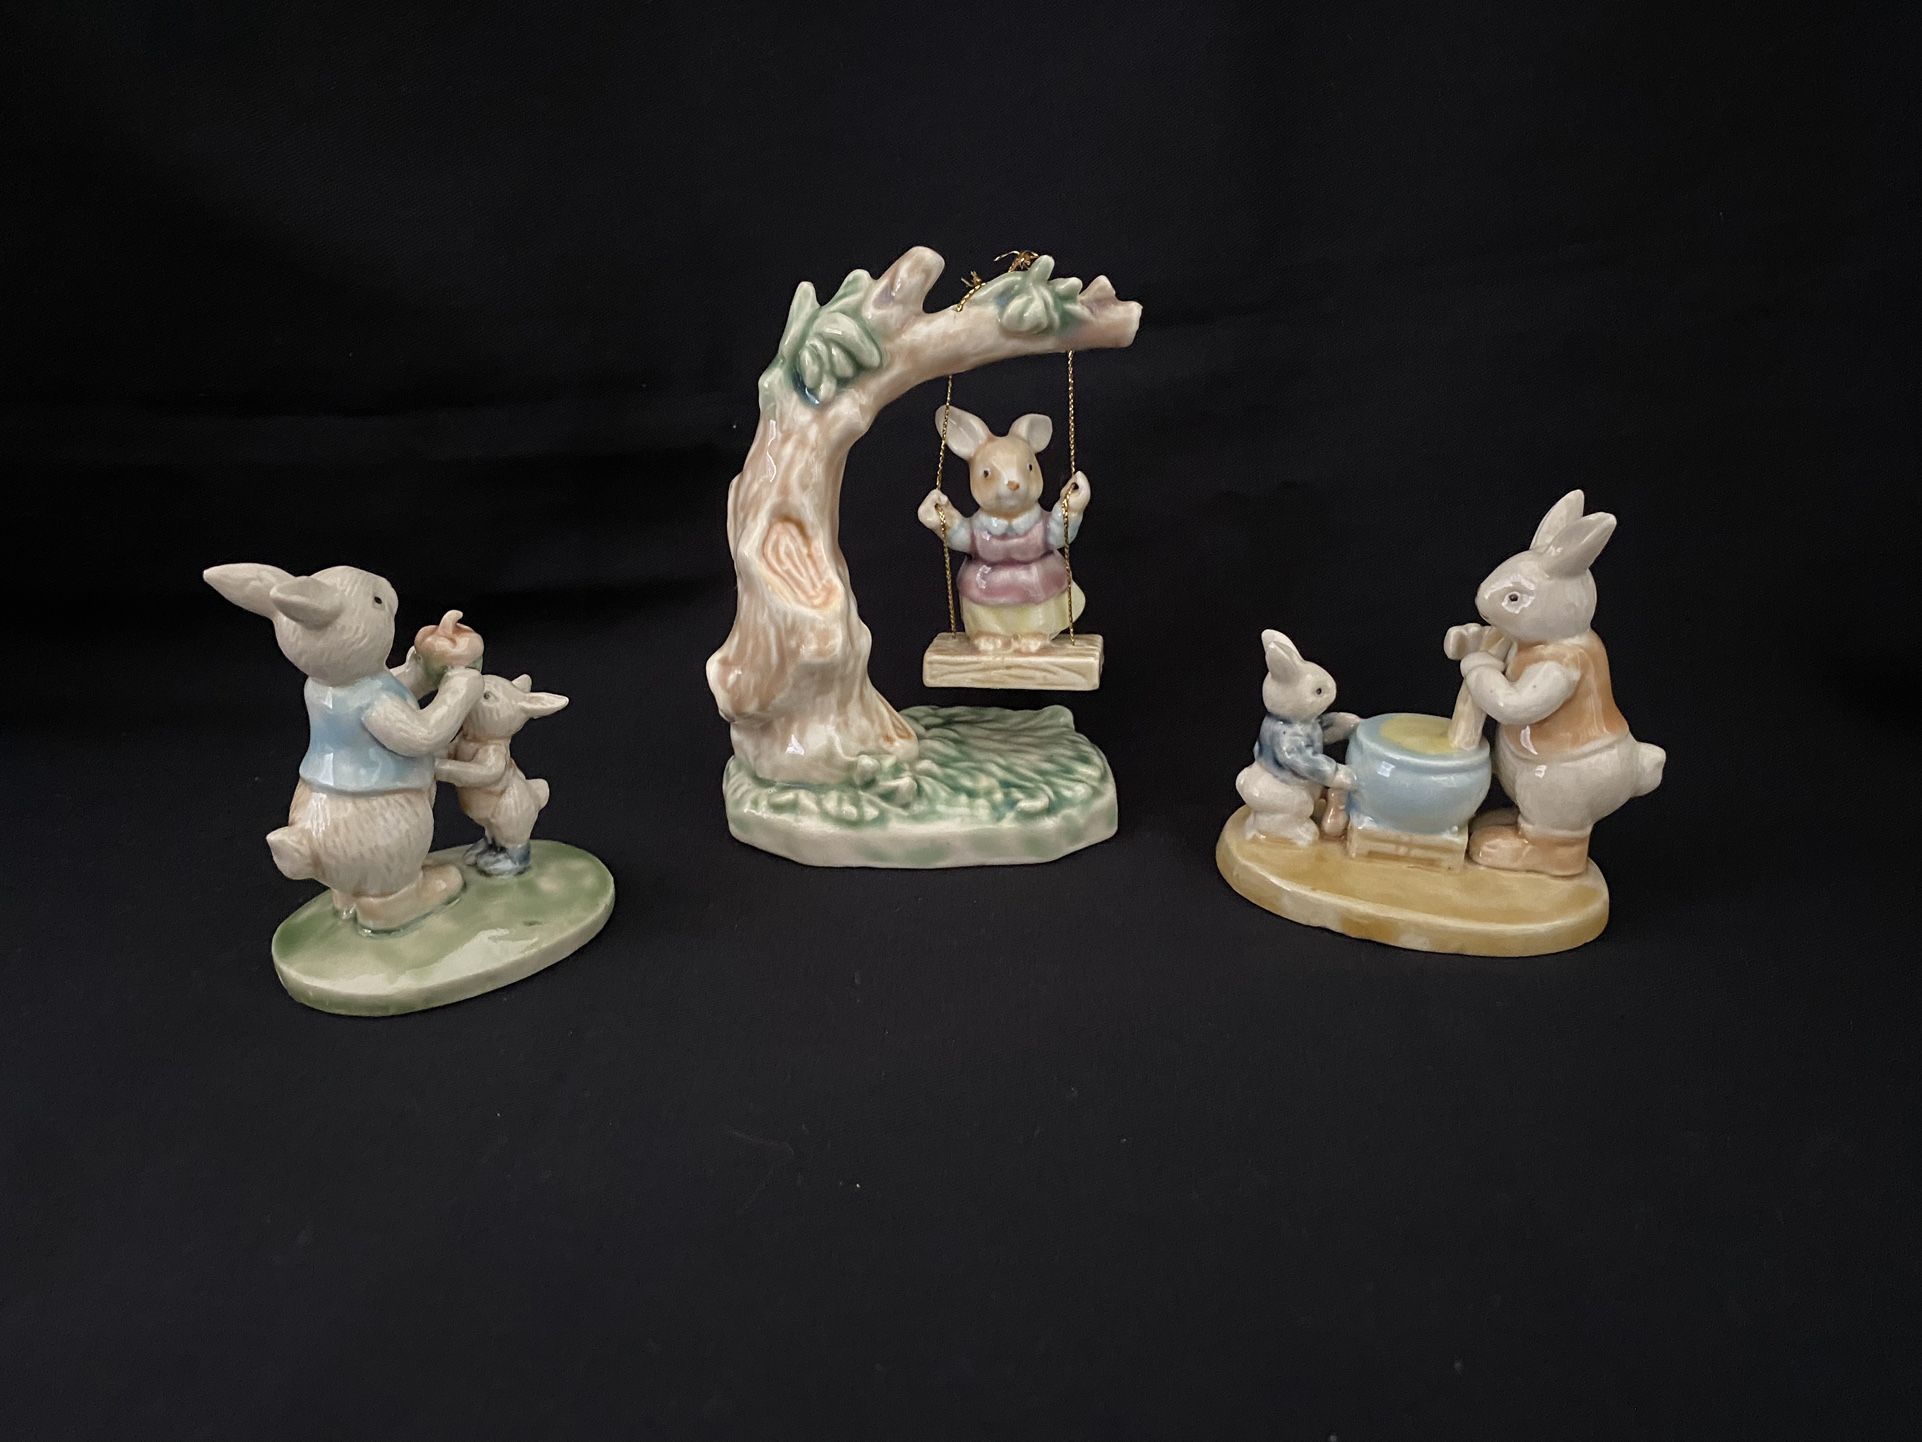 3 Vintage K’s Collection Bunny Rabbit Figurines Swing Glossy Porcelain Easter Decorations 